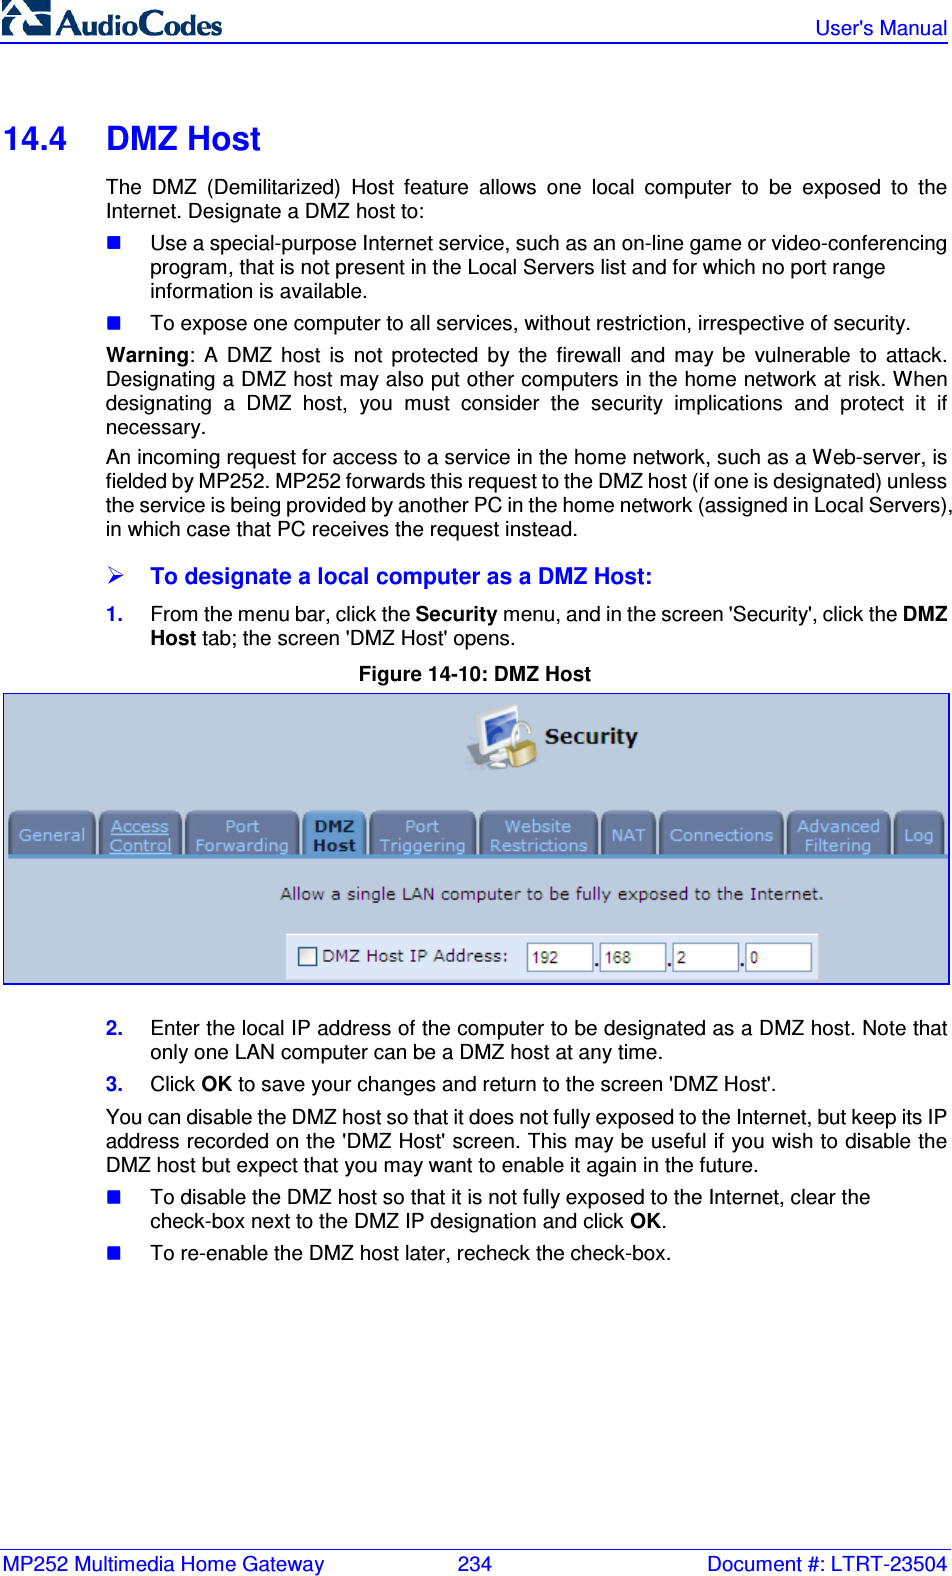 MP252 Multimedia Home Gateway  234  Document #: LTRT-23504   User&apos;s Manual  14.4  DMZ Host The  DMZ  (Demilitarized)  Host  feature  allows  one  local  computer  to  be  exposed  to  the Internet. Designate a DMZ host to:  Use a special-purpose Internet service, such as an on-line game or video-conferencing program, that is not present in the Local Servers list and for which no port range information is available.  To expose one computer to all services, without restriction, irrespective of security. Warning:  A  DMZ  host  is  not  protected  by  the  firewall  and  may  be  vulnerable  to  attack. Designating a DMZ host may also put other computers in the home network at risk. When designating  a  DMZ  host,  you  must  consider  the  security  implications  and  protect  it  if necessary. An incoming request for access to a service in the home network, such as a Web-server, is fielded by MP252. MP252 forwards this request to the DMZ host (if one is designated) unless the service is being provided by another PC in the home network (assigned in Local Servers), in which case that PC receives the request instead.  To designate a local computer as a DMZ Host: 1.  From the menu bar, click the Security menu, and in the screen &apos;Security&apos;, click the DMZ Host tab; the screen &apos;DMZ Host&apos; opens. Figure 14-10: DMZ Host  2.  Enter the local IP address of the computer to be designated as a DMZ host. Note that only one LAN computer can be a DMZ host at any time. 3.  Click OK to save your changes and return to the screen &apos;DMZ Host&apos;. You can disable the DMZ host so that it does not fully exposed to the Internet, but keep its IP address recorded on the &apos;DMZ Host&apos; screen. This may be useful if you wish to disable the DMZ host but expect that you may want to enable it again in the future.  To disable the DMZ host so that it is not fully exposed to the Internet, clear the check-box next to the DMZ IP designation and click OK.  To re-enable the DMZ host later, recheck the check-box.  